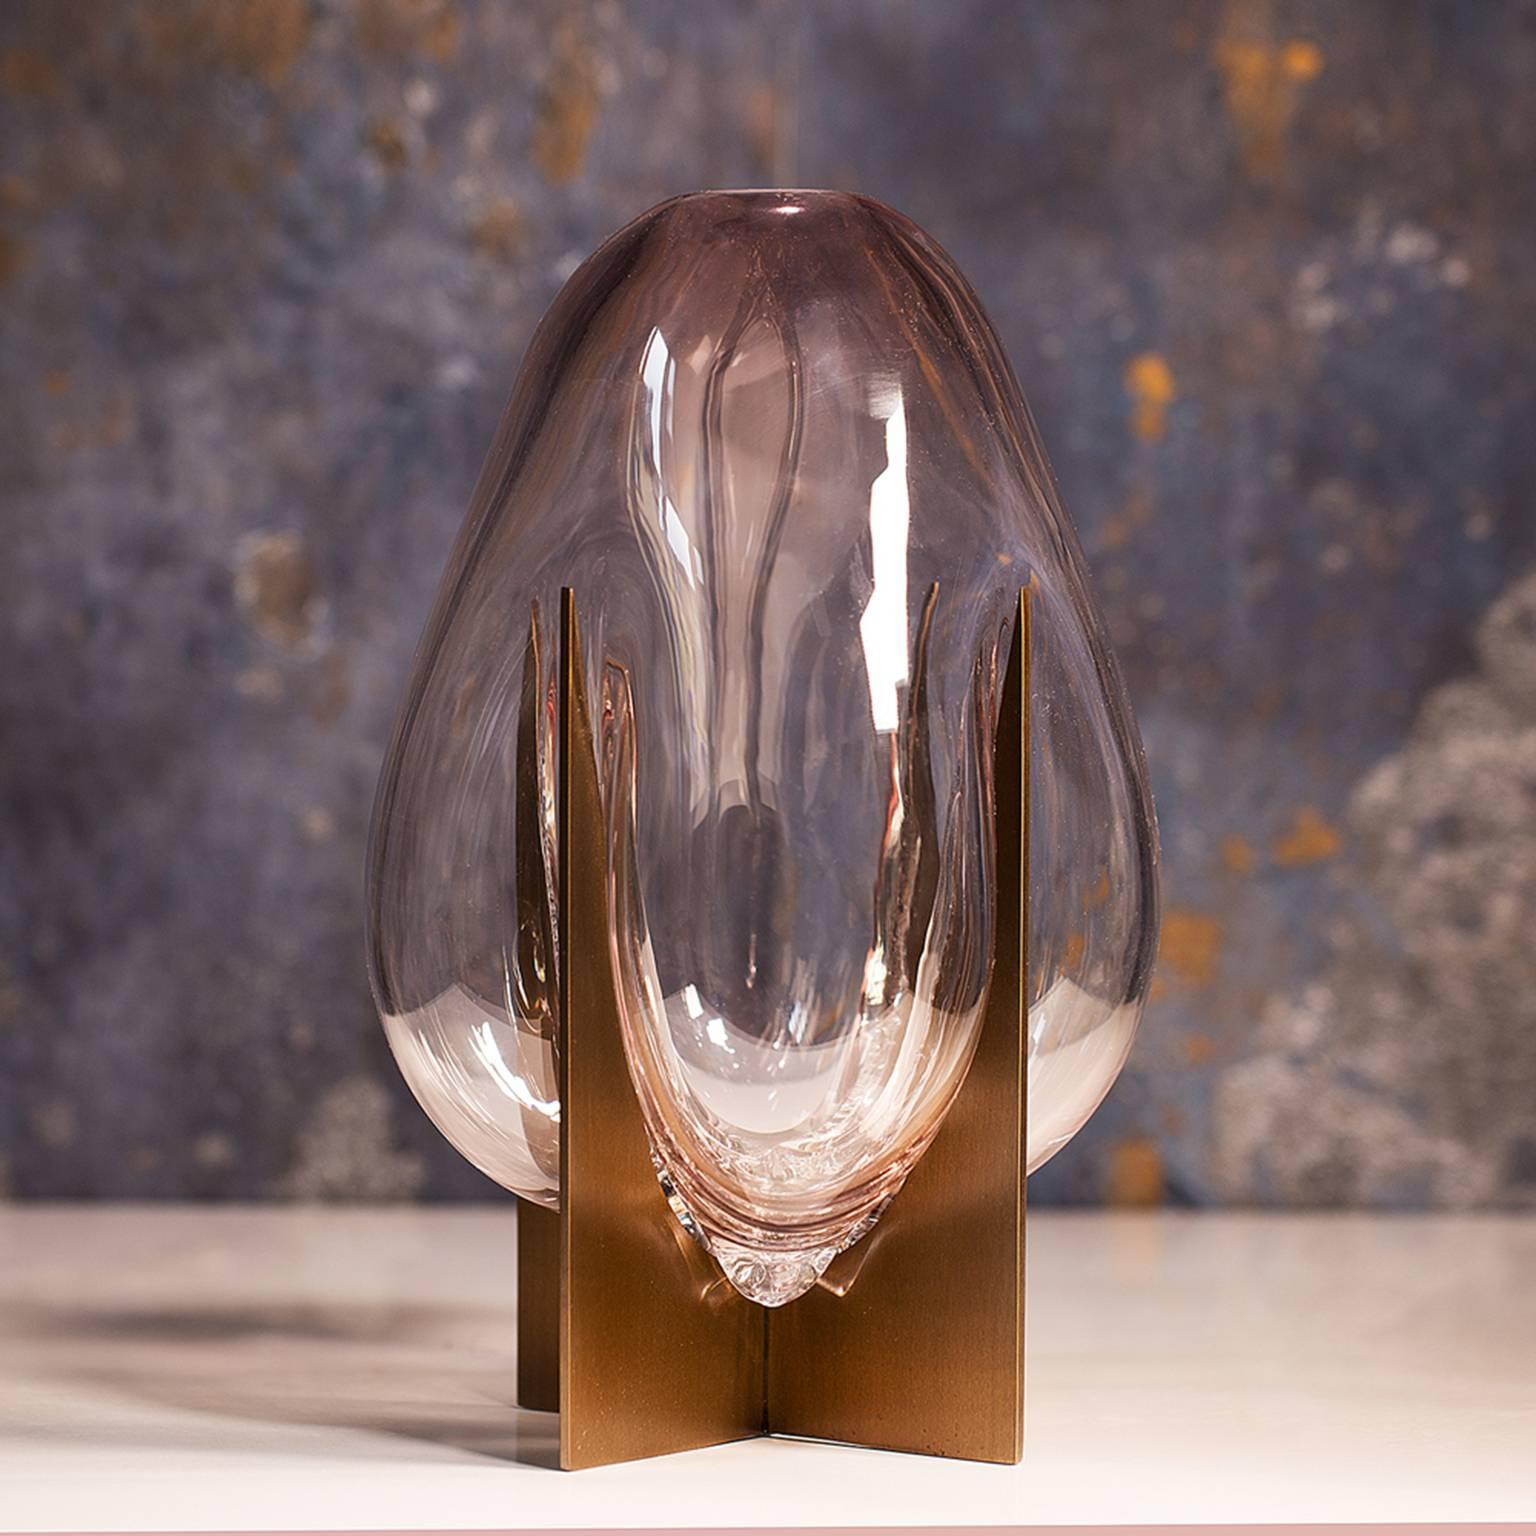 Hand-Crafted Venturi Pear Blue Crackle Vase, Murano Glass and Metal by Lara Bohinc, in Stock